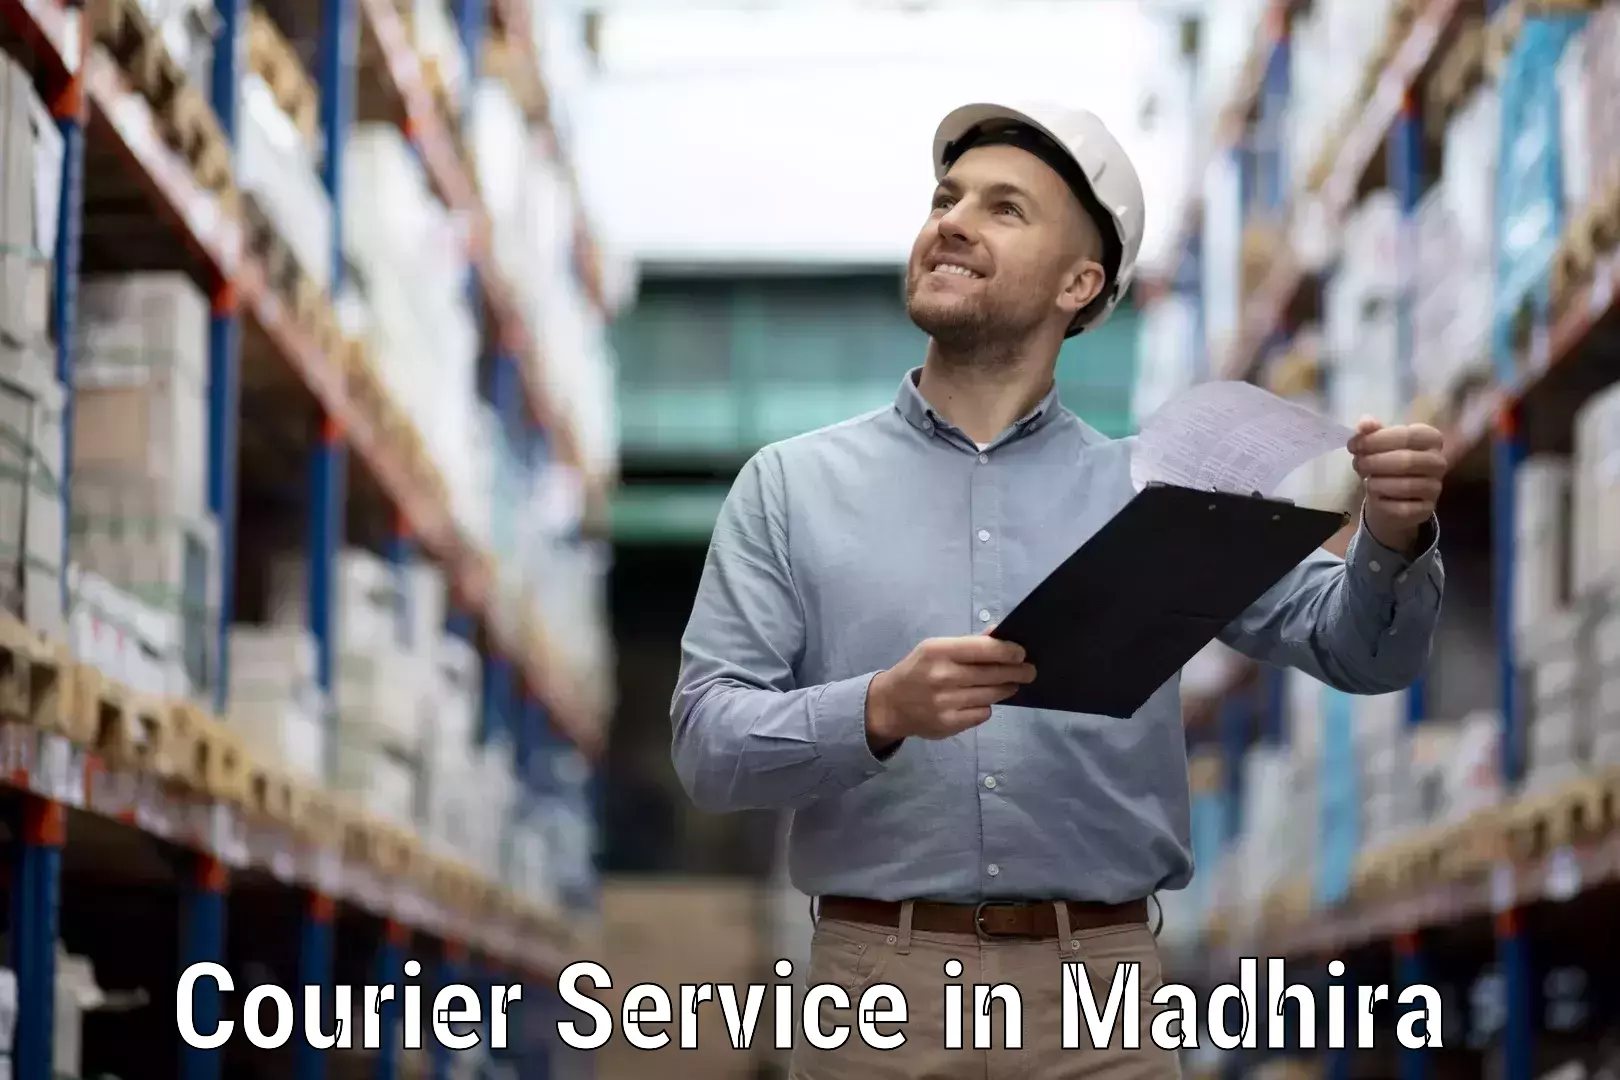 On-call courier service in Madhira